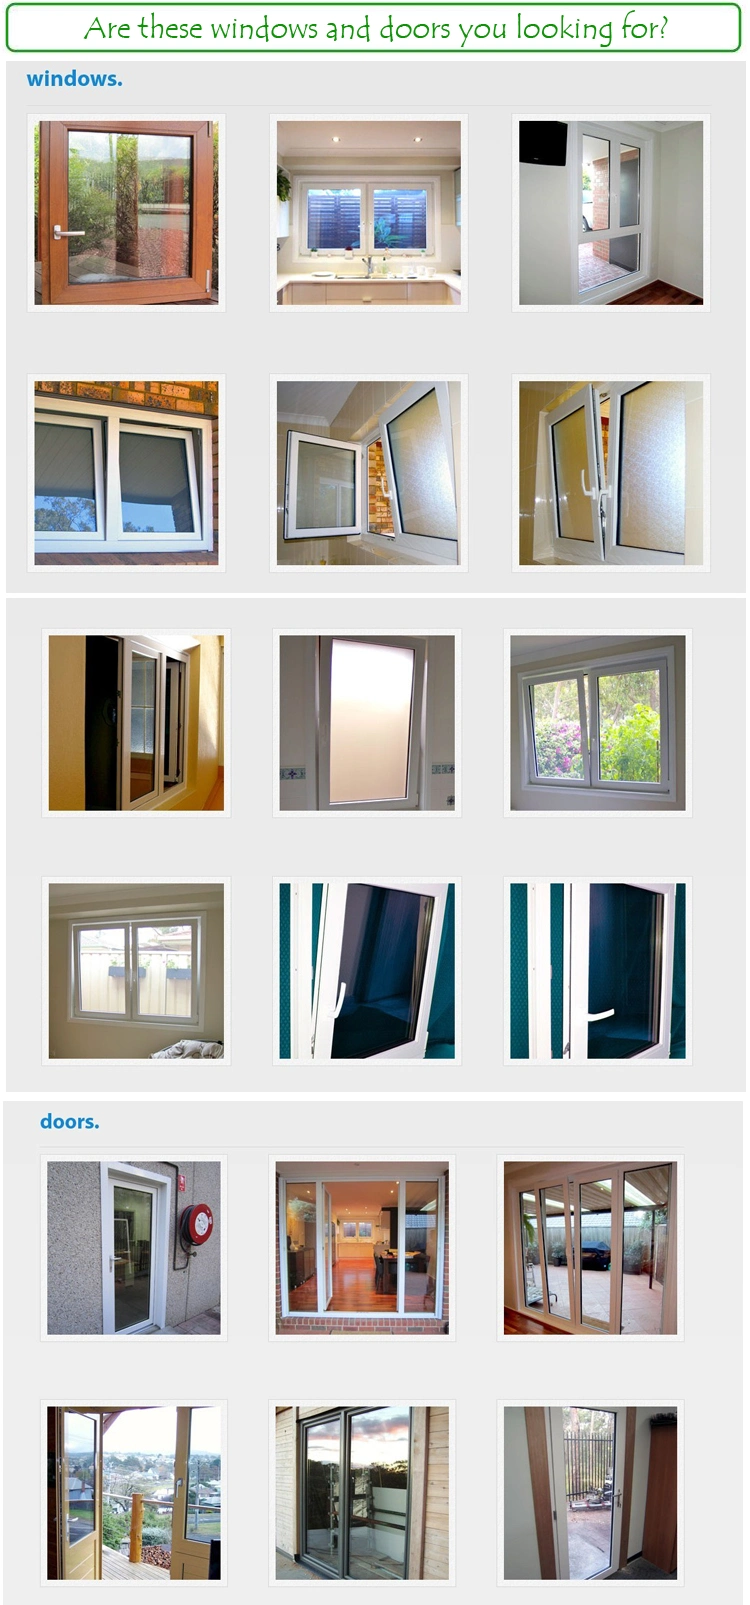 High Quality PVC Single Hung Windows for House and Building